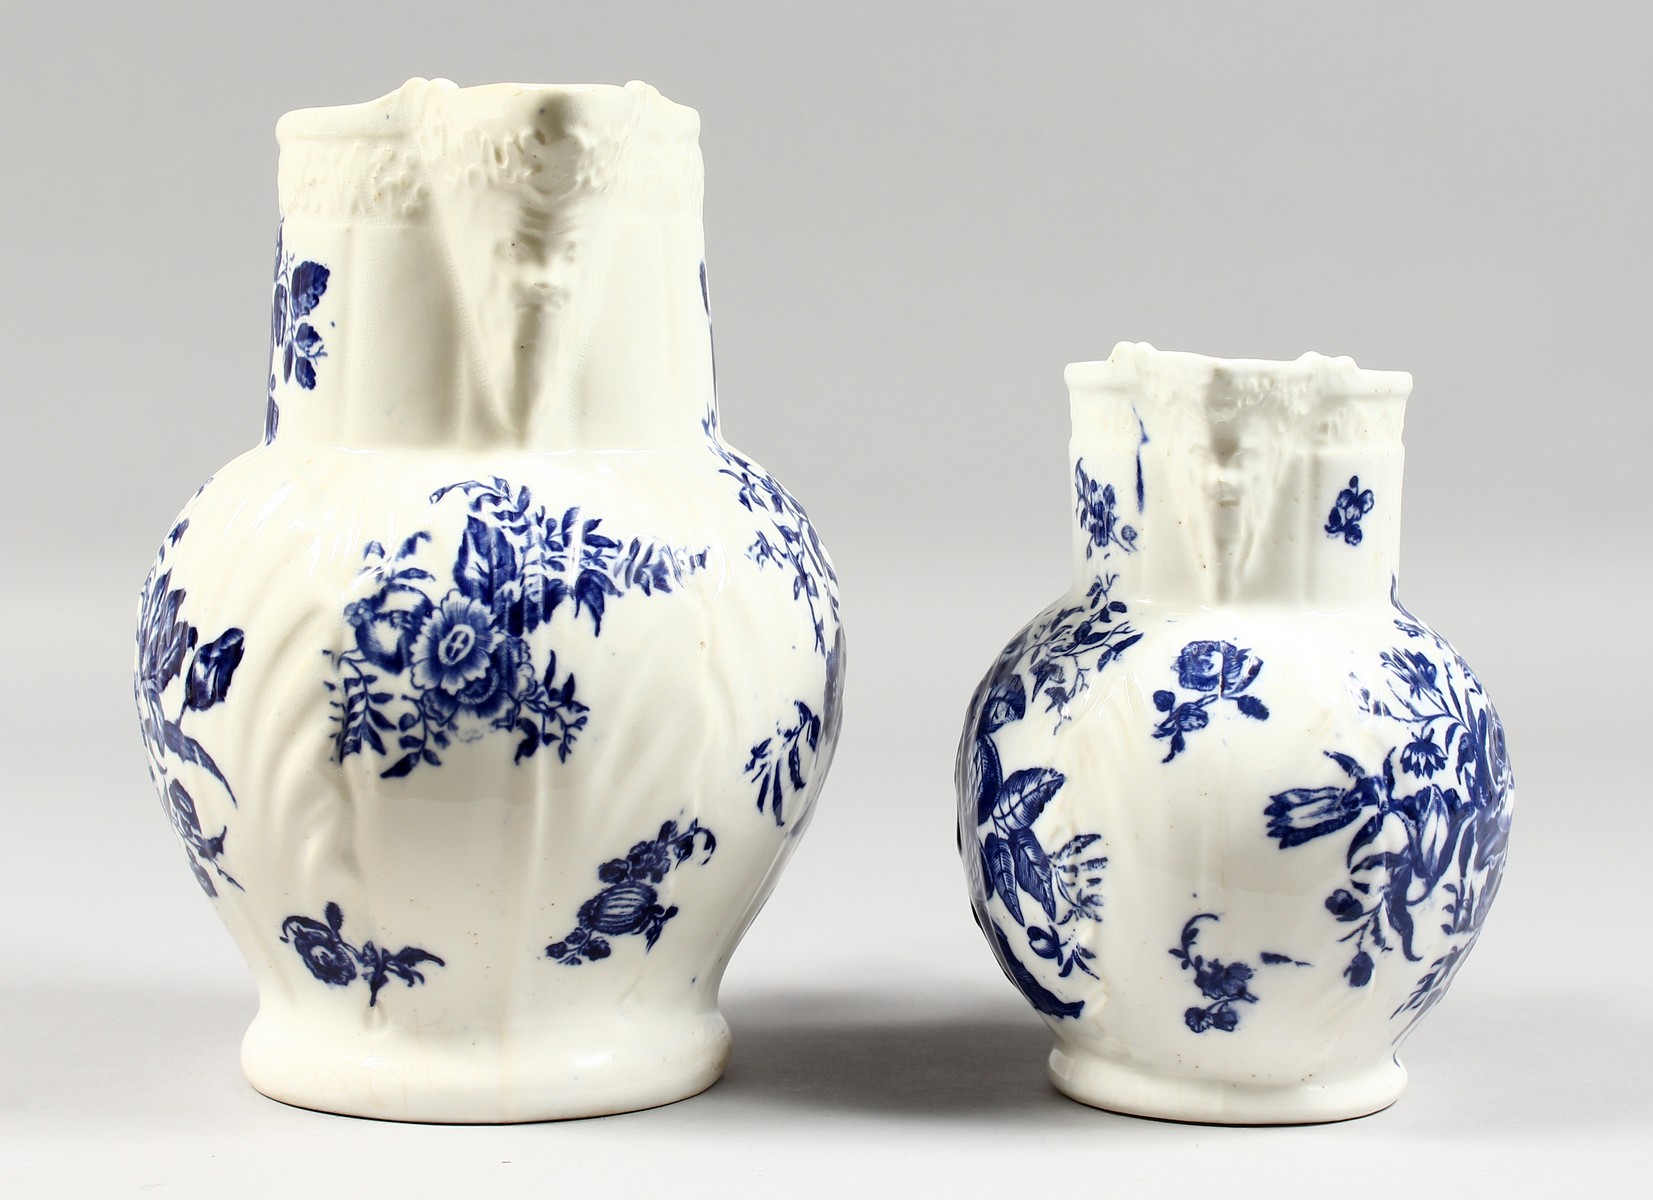 A GRADUATED PAIR OF DECORATIVE ENGLISH PORCELAIN MASK JUGS printed with fir cones and roses in